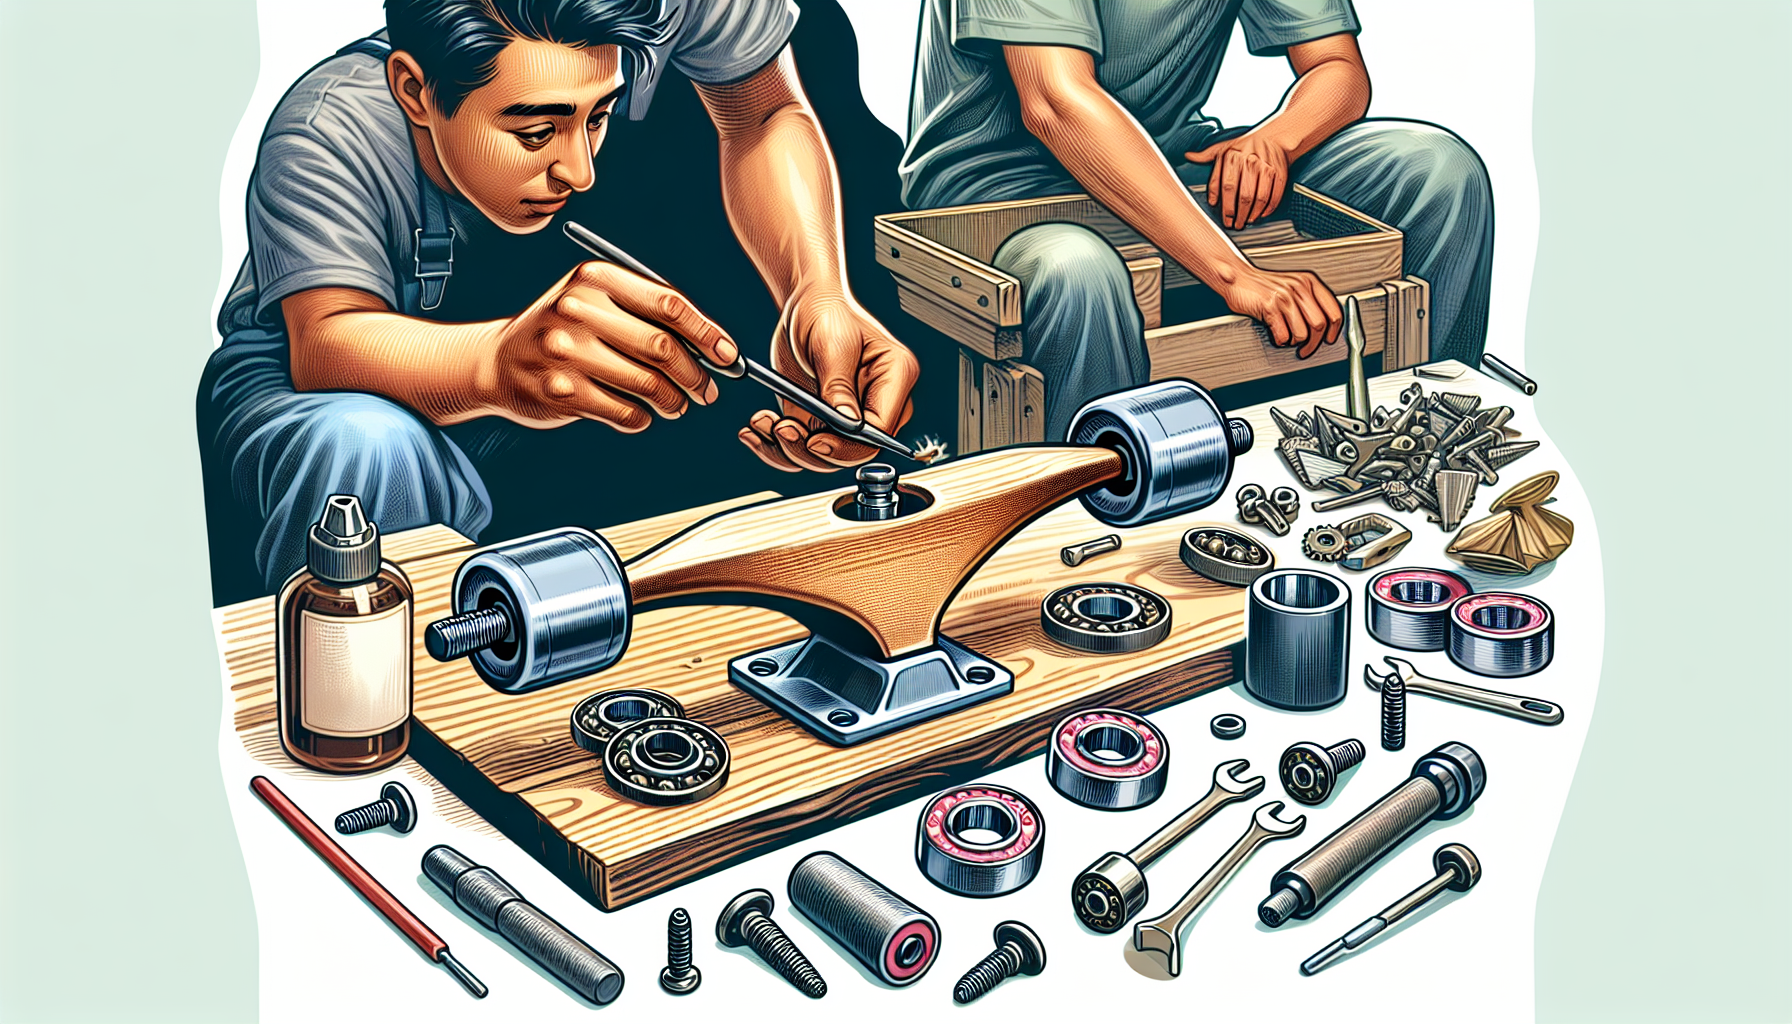 What Are The Best Practices For Maintaining Skateboard Trucks And Bearings?